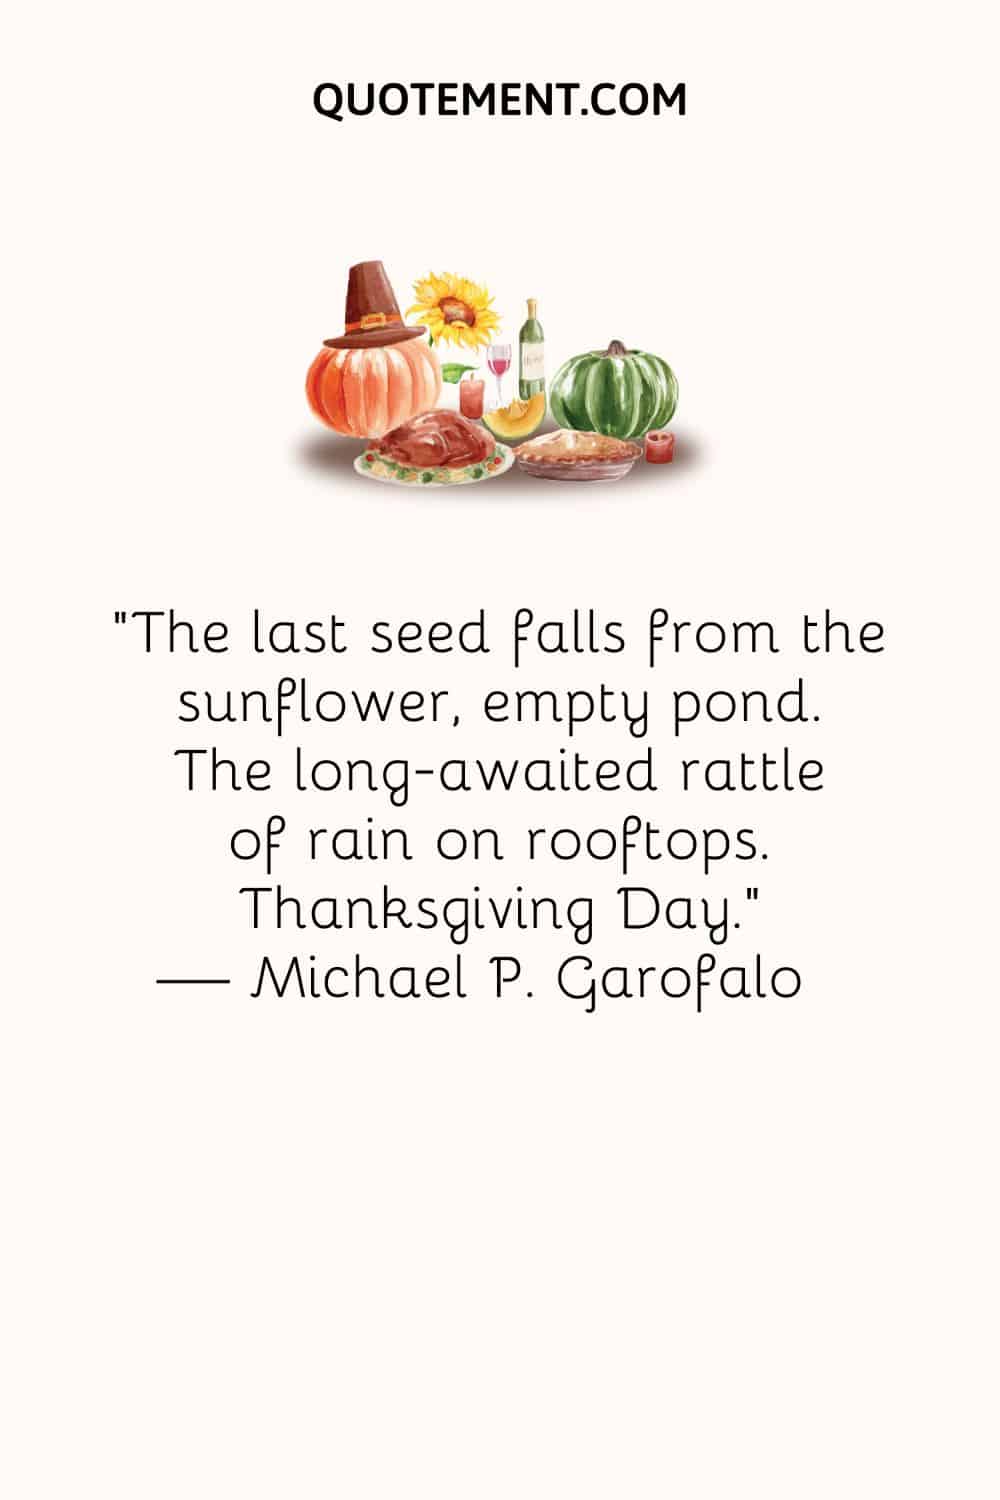 The last seed falls from the sunflower, empty pond. The long-awaited rattle of rain on rooftops. Thanksgiving Day